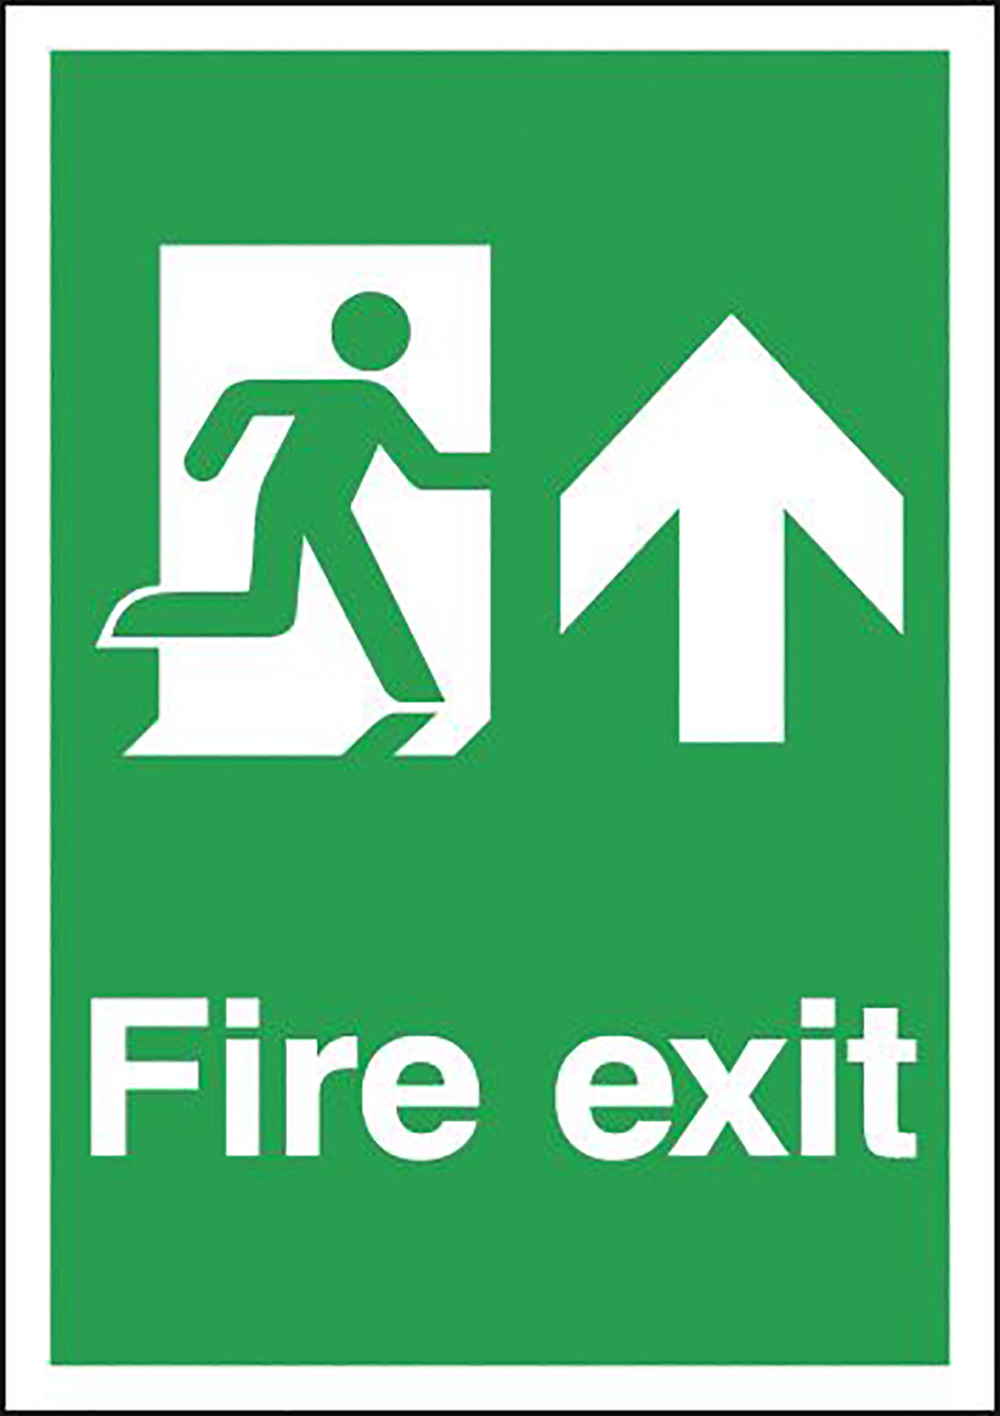 Fire Exit Running Man Up  297x210mm 1.2mm Rigid Plastic Safety Sign  